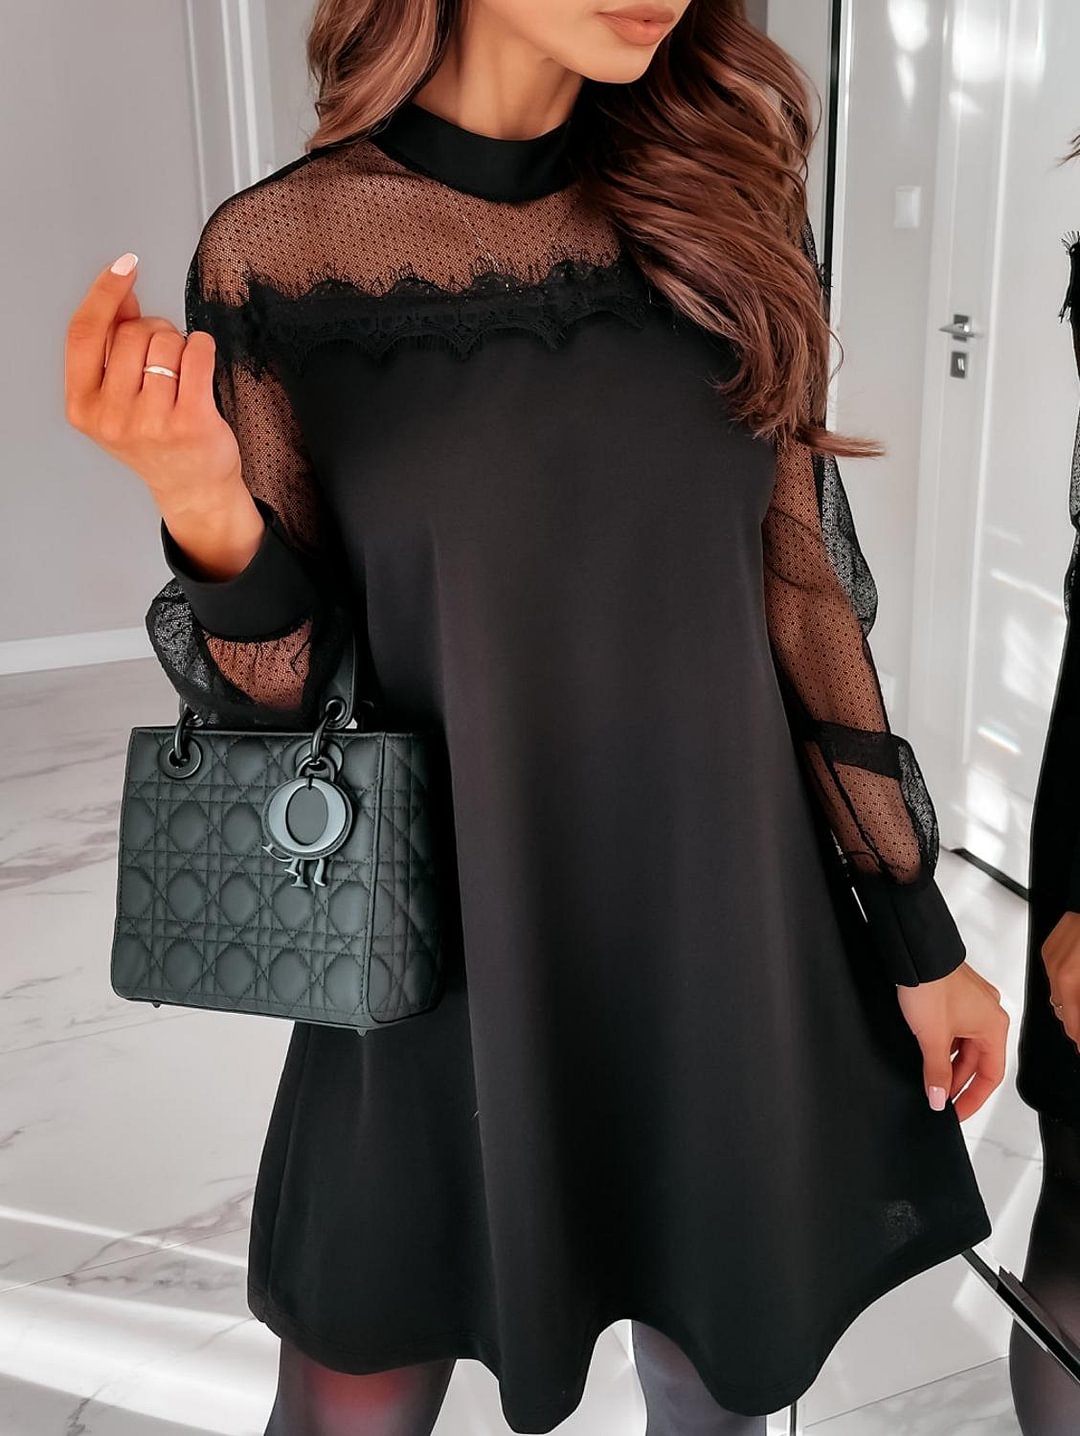 2021 spring fashion hot sale women's solid color round neck lace sexy long-sleeved street straight A-line dress women #9327